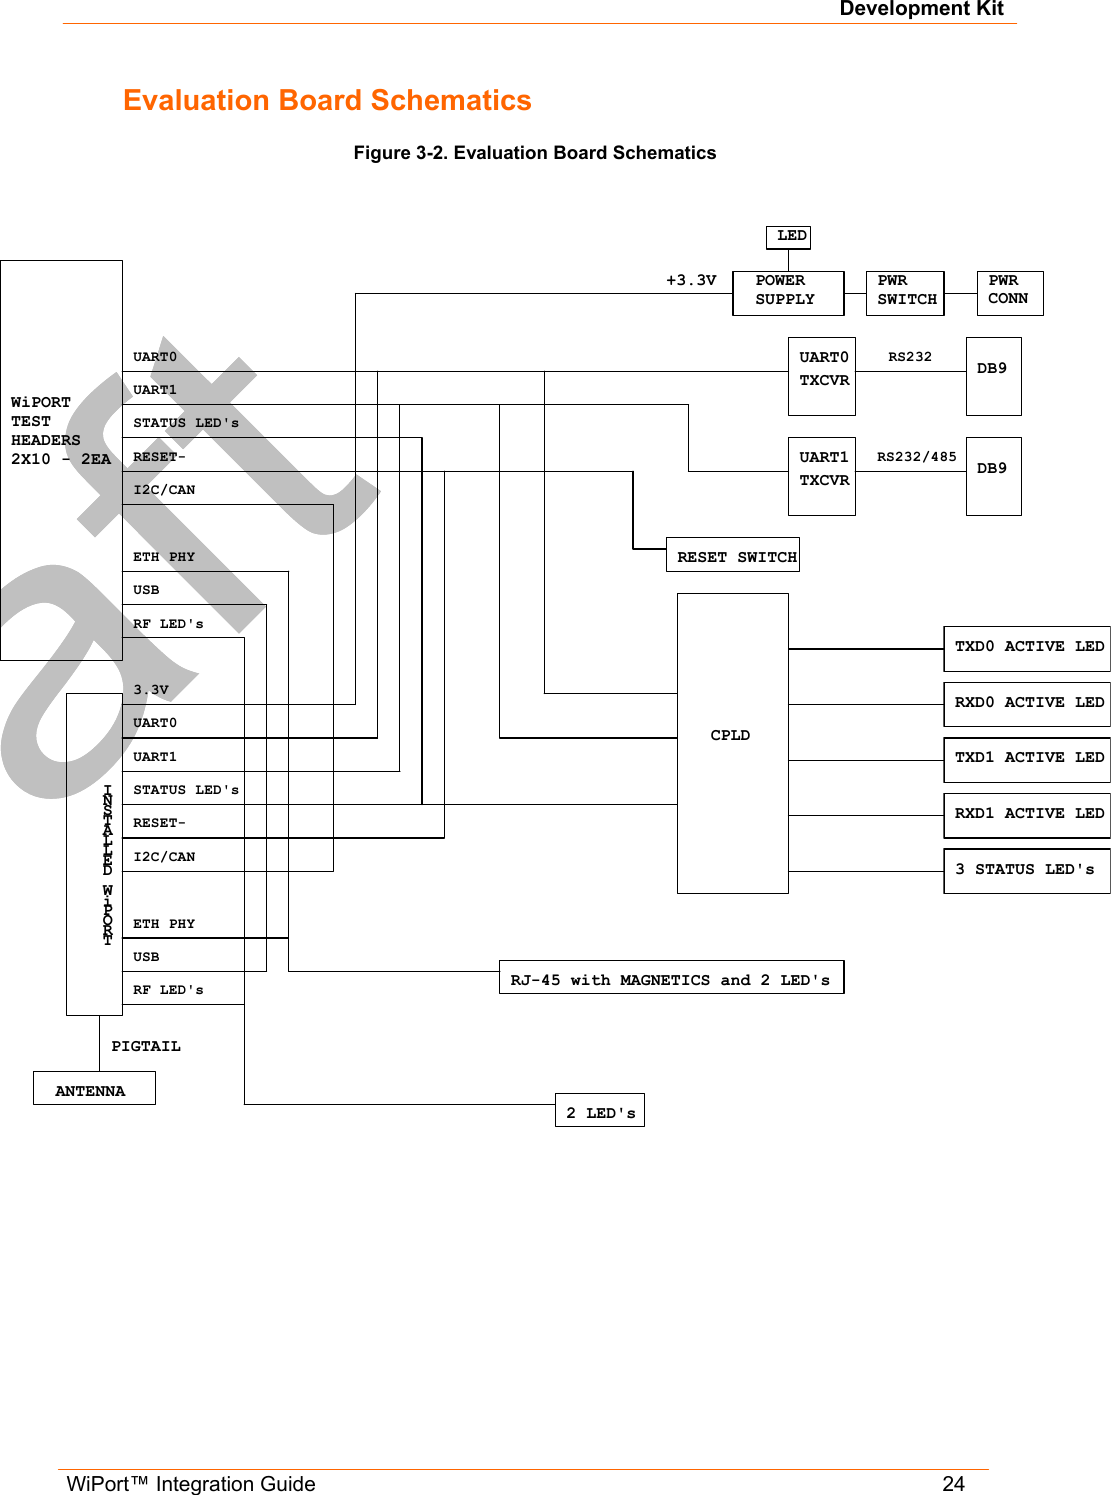 Development Kit WiPort™ Integration Guide   24 Evaluation Board Schematics  Figure 3-2. Evaluation Board Schematics   RS232RS232/485DB9UART1TXCVR3 STATUS LED&apos;sRESET SWITCHRJ-45 with MAGNETICS and 2 LED&apos;sUSB USB ANTENNAPWRSWITCHCPLDRXD1 ACTIVE LEDTXD1 ACTIVE LEDRXD0 ACTIVE LEDTXD0 ACTIVE LEDDB9TXCVRLEDPWRCONNPOWERSUPPLY+3.3VWiPORTTESTHEADERS2X10 - 2EAI2C/CANUART0UART1UART0RESET-ETH PHYSTATUS LED&apos;sRF LED&apos;s2 LED&apos;sPIGTAILINSTALLED WiPORTI2C/CAN3.3VUART0UART1RESET-ETH PHYSTATUS LED&apos;sRF LED&apos;s